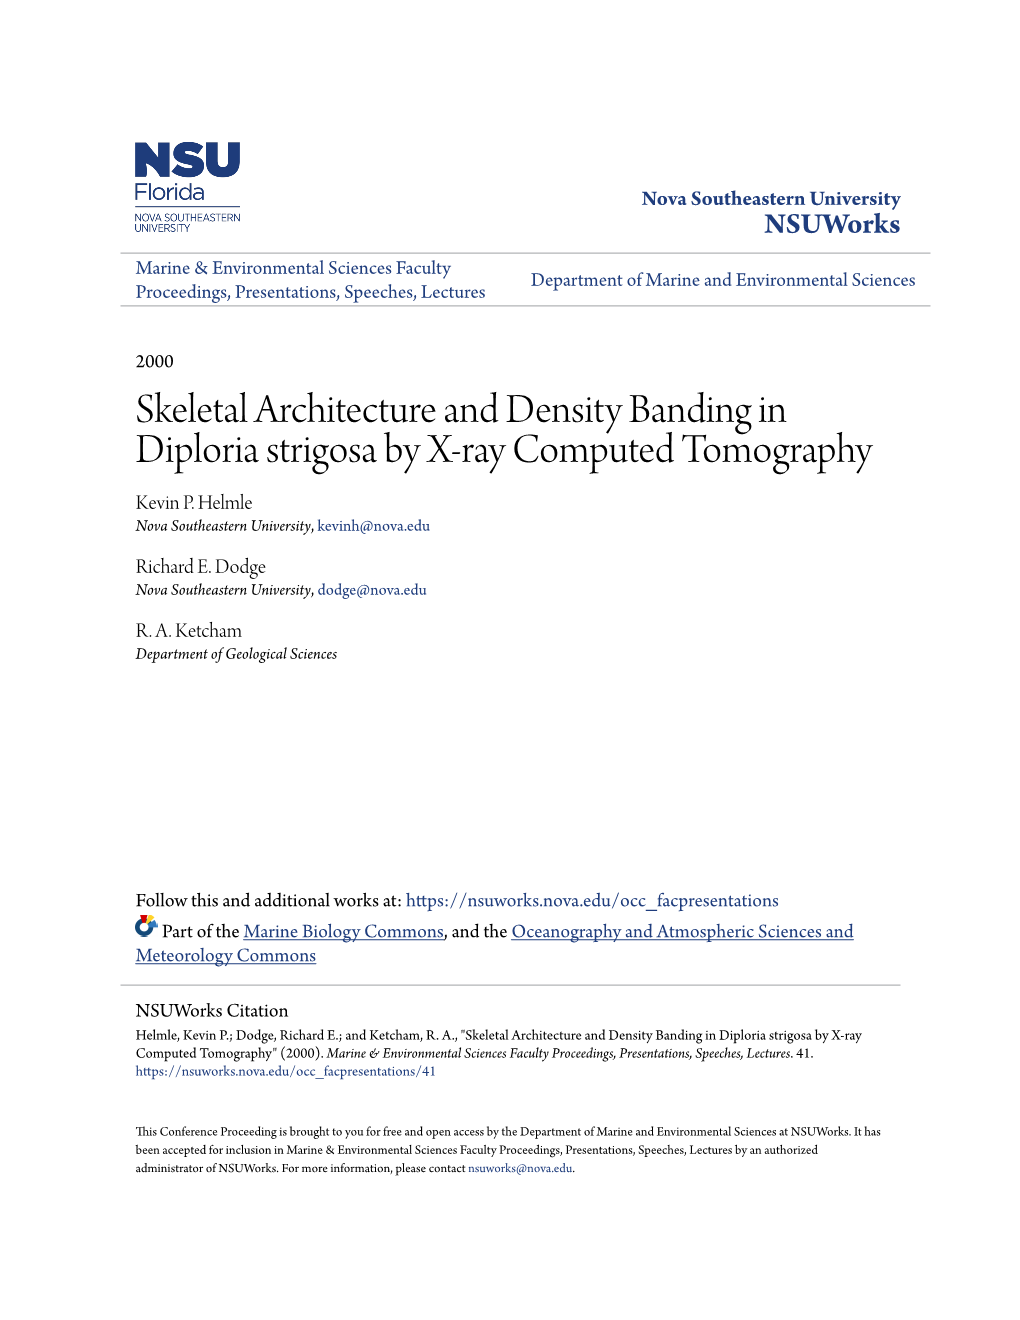 Skeletal Architecture and Density Banding in Diploria Strigosa by X-Ray Computed Tomography Kevin P